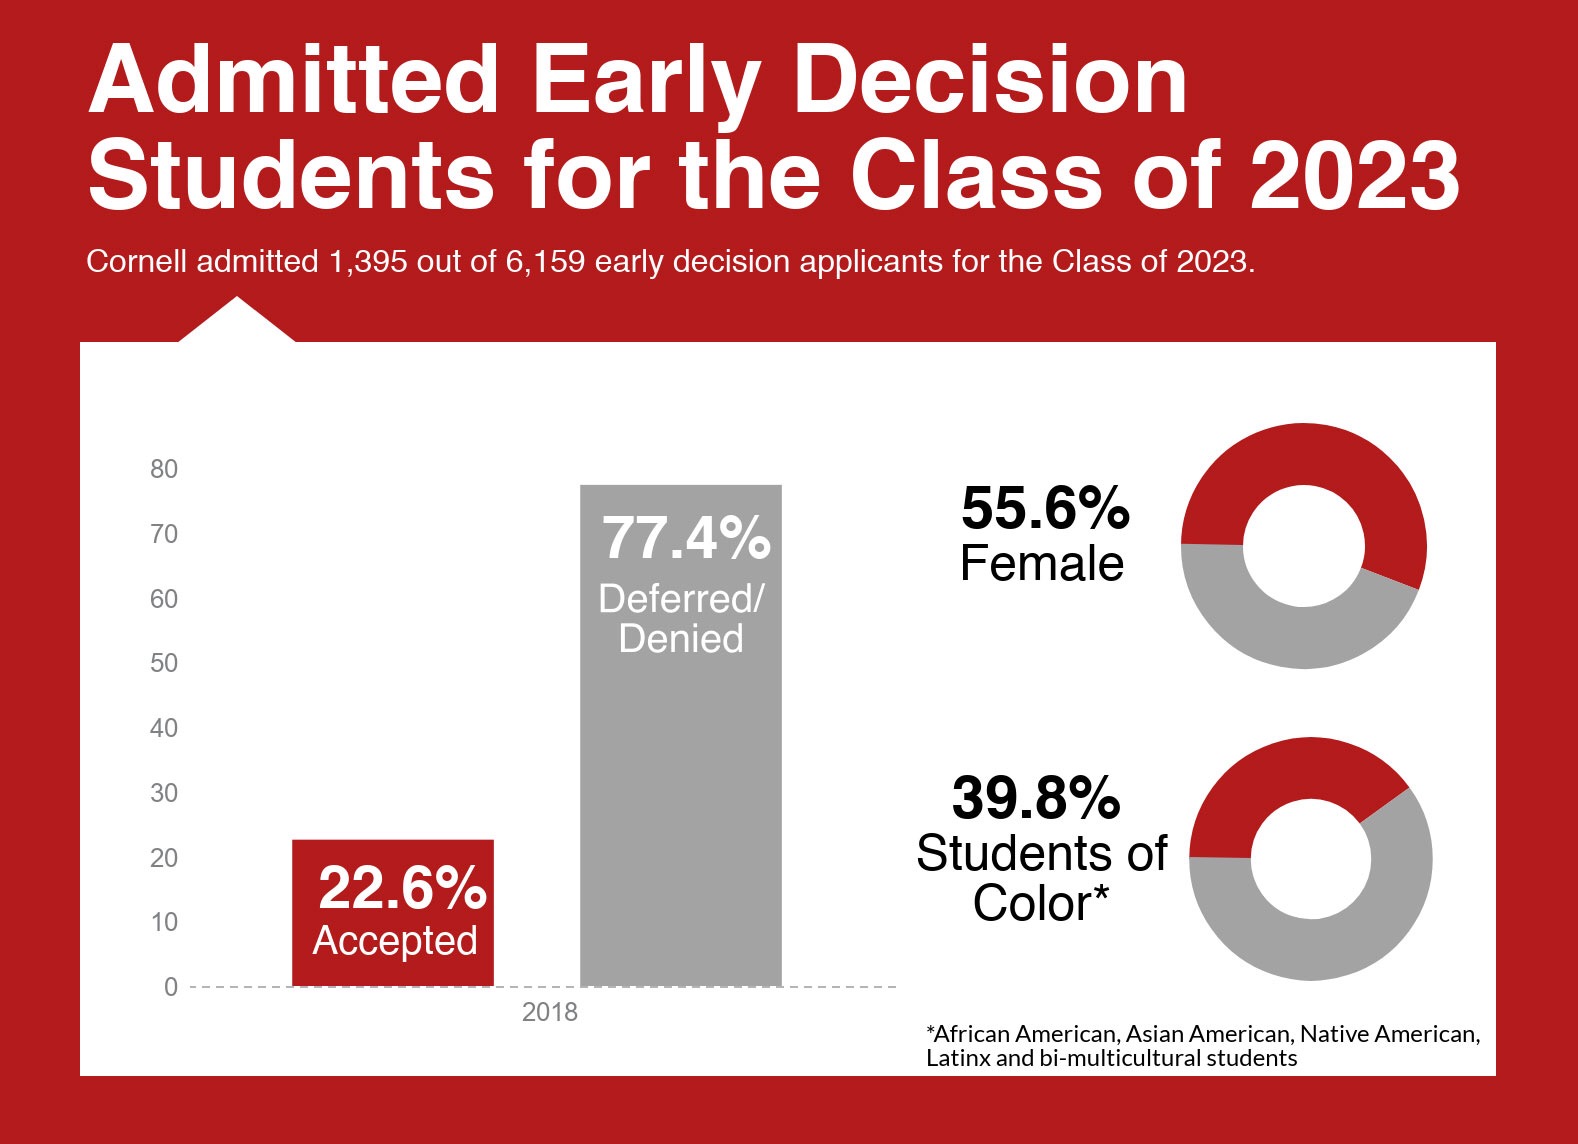 Cornell Academic Calendar 2022 2023 Cornell Accepts 22.6 Percent Of Early Decision Applicants For The Class Of  2023 | The Cornell Daily Sun